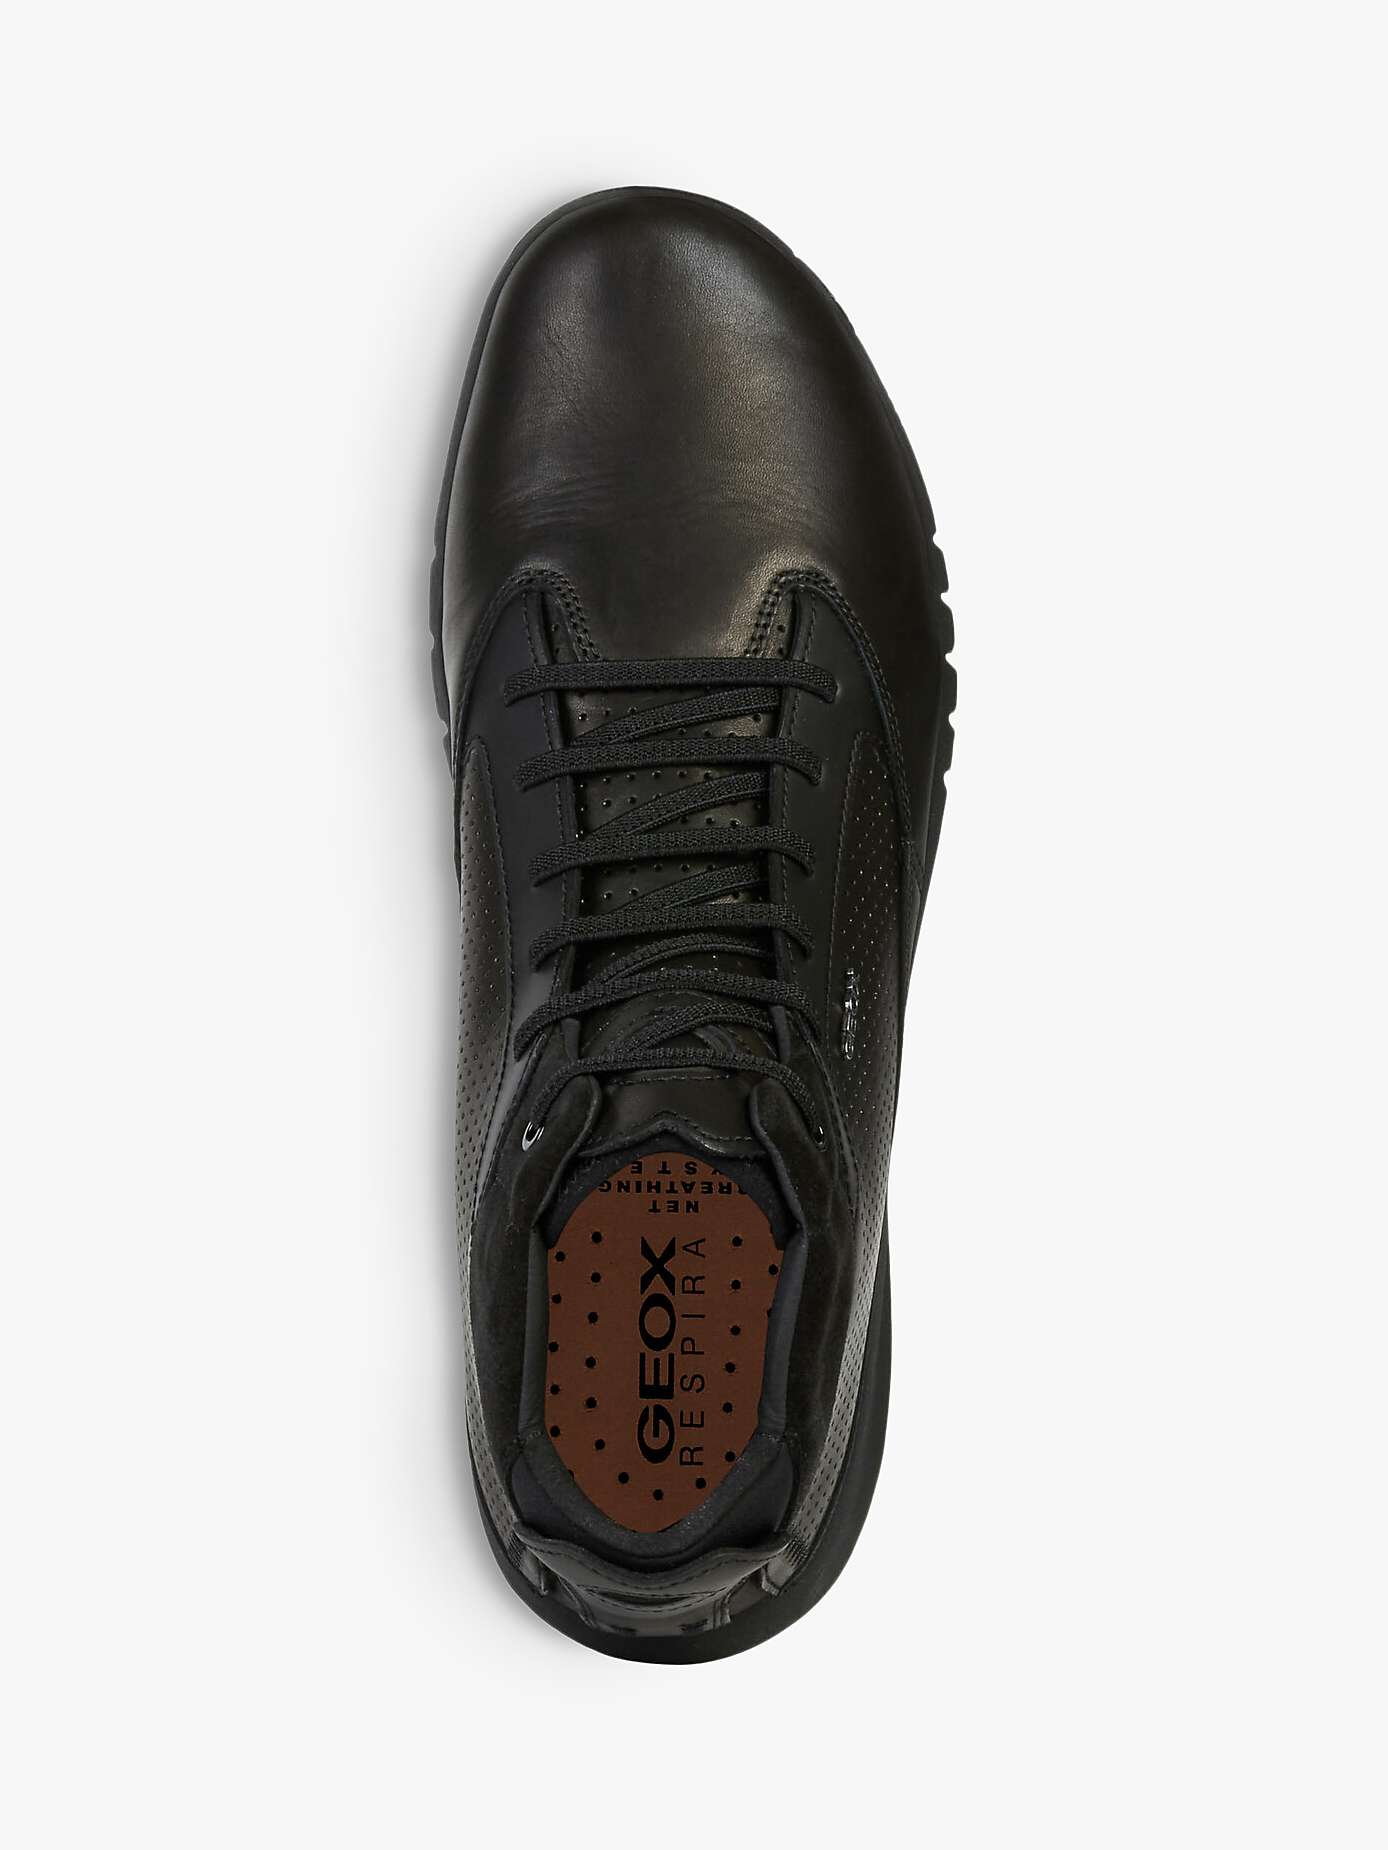 Buy Geox Aerantis High Top Leather Trainers, Black Online at johnlewis.com